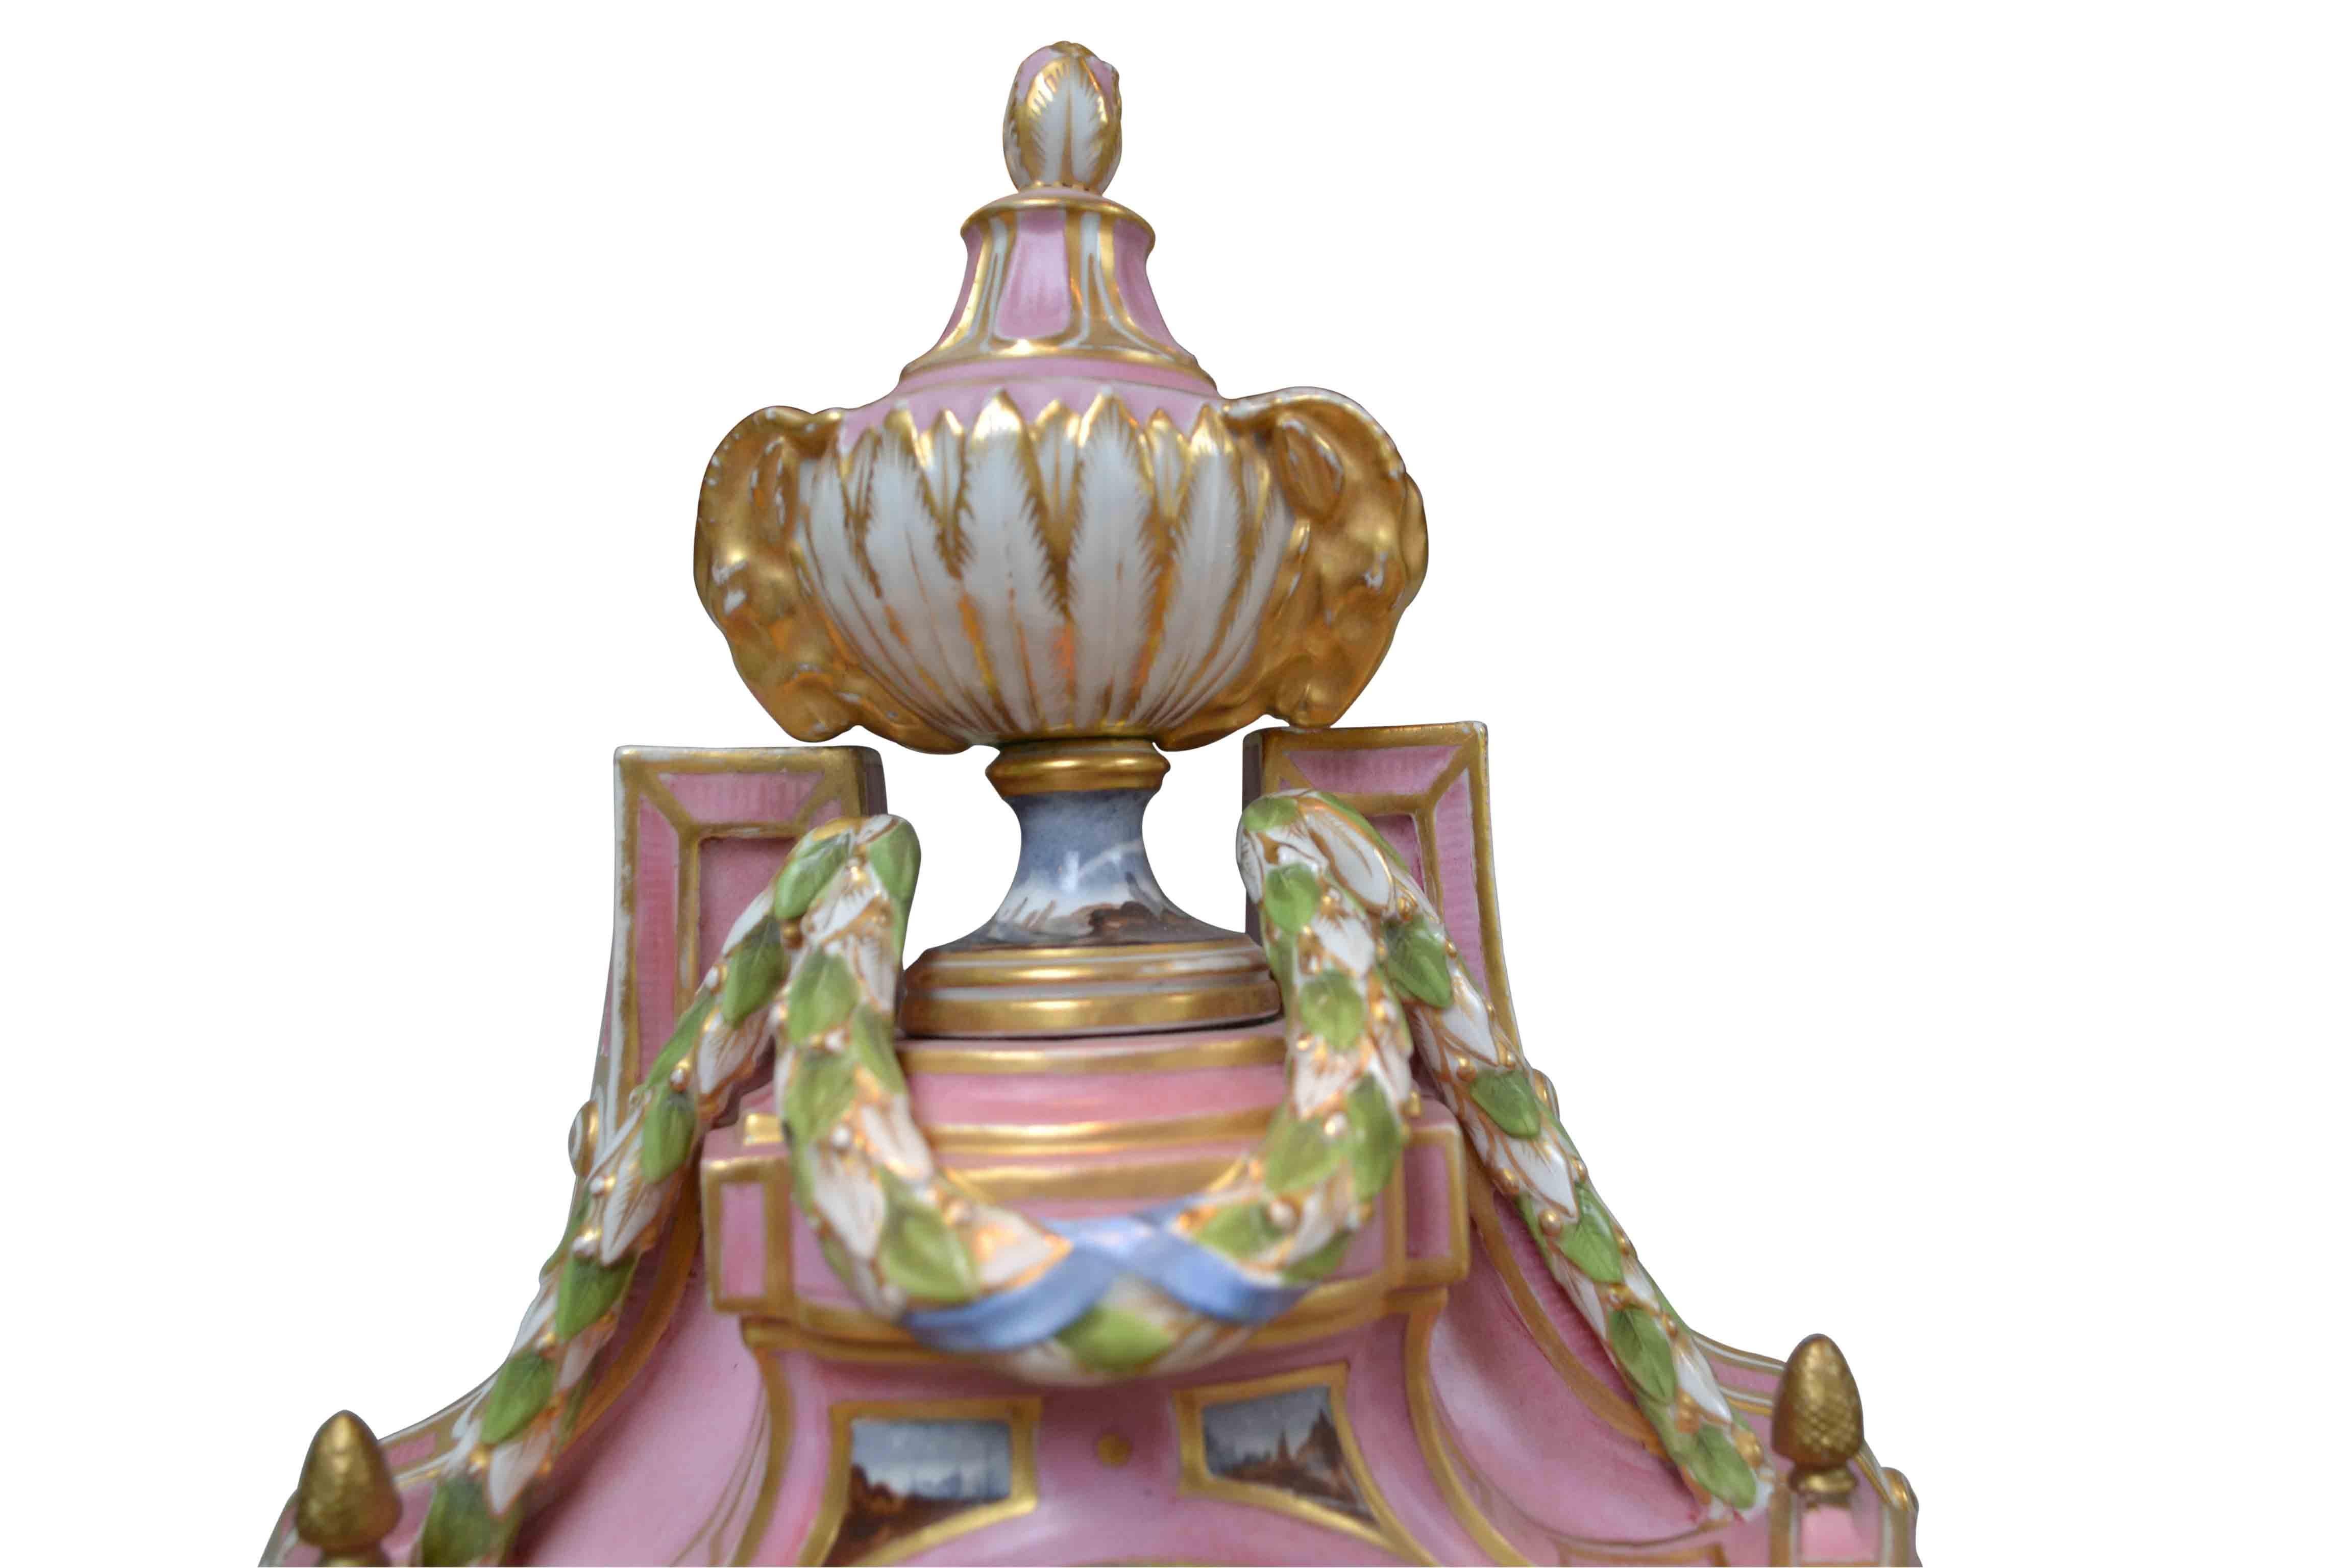 A finely decorated pink porcelain Cartel clock in the Louis XVI style; the predominantly pink case surmounted by a classical urn with goats heads and colored enamel swags. Below the white enamel dial with Roman numerals is a finely painted village